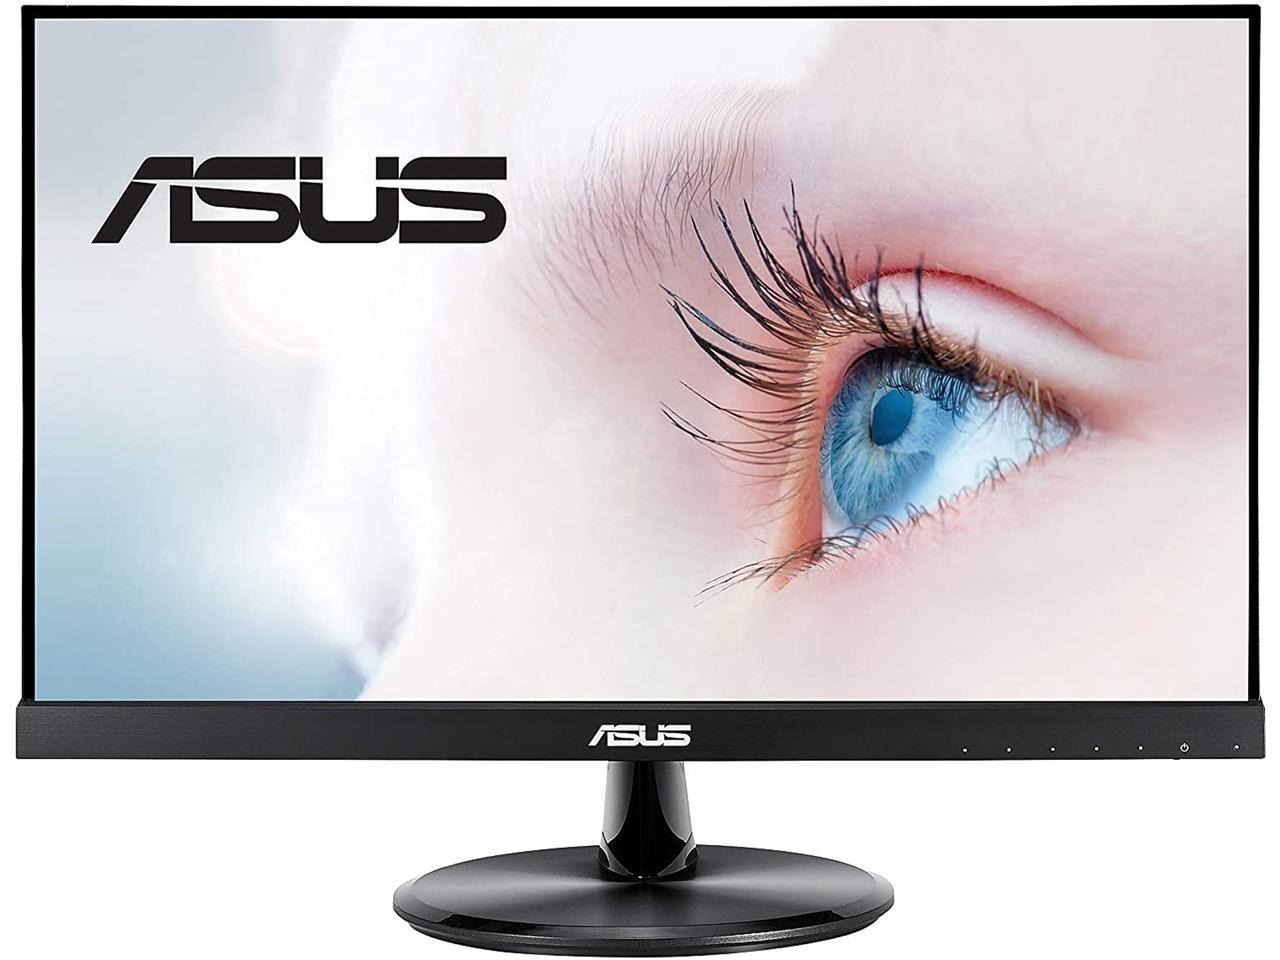 22" 1080P ASUS VP229HE 75Hz Monitor $80 + Free Shipping